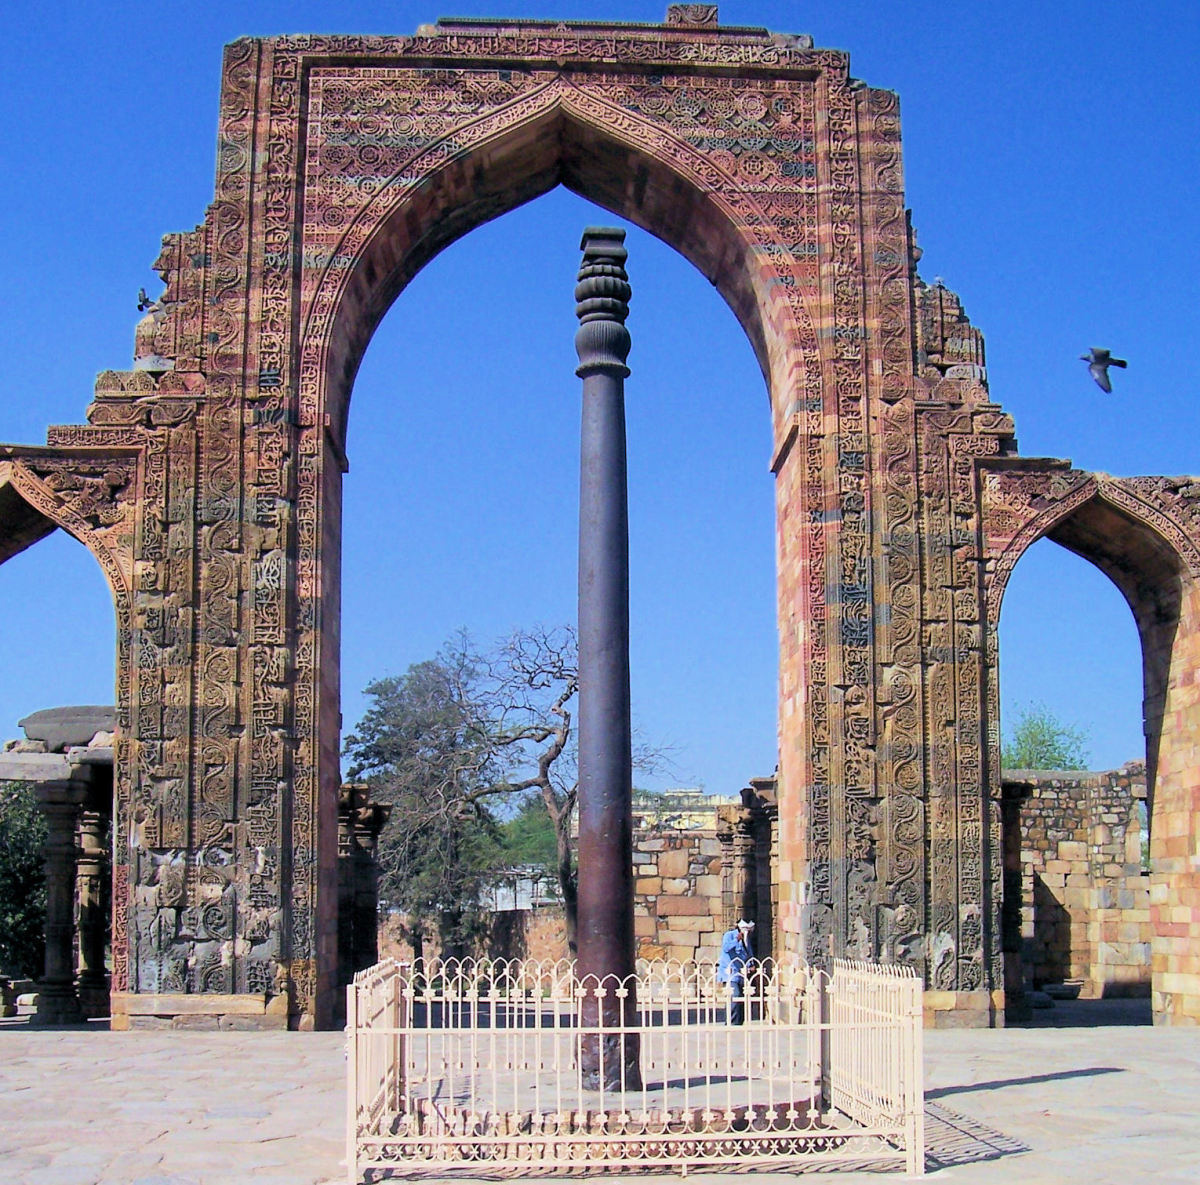 The Iron Pillar of Delhi has never rusted in the past 1600 years .